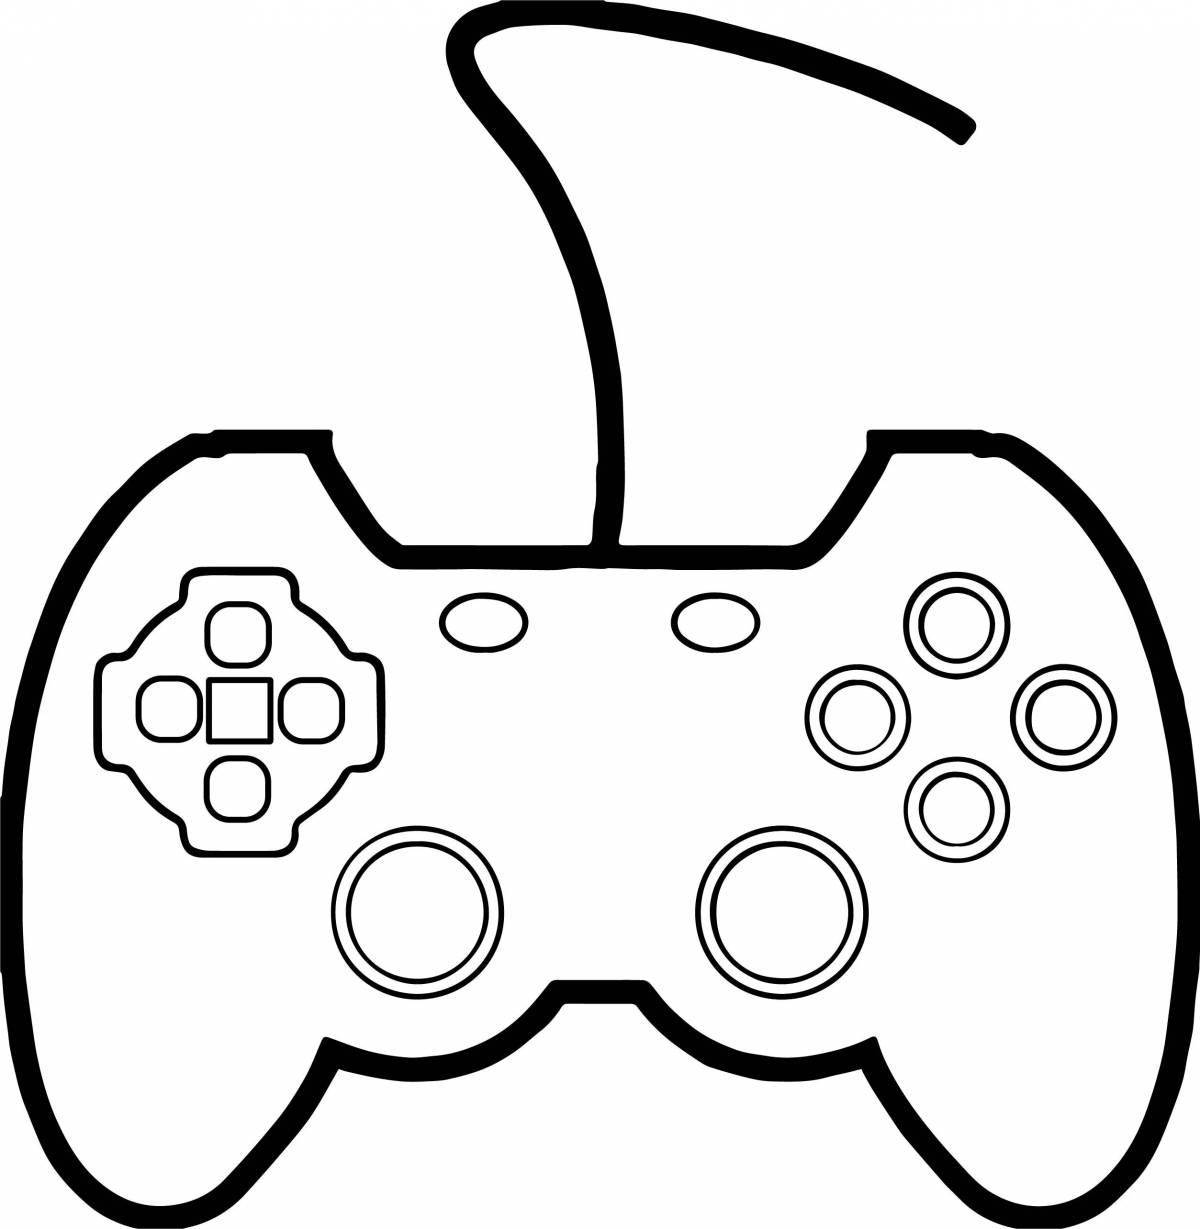 Awesome video game coloring pages